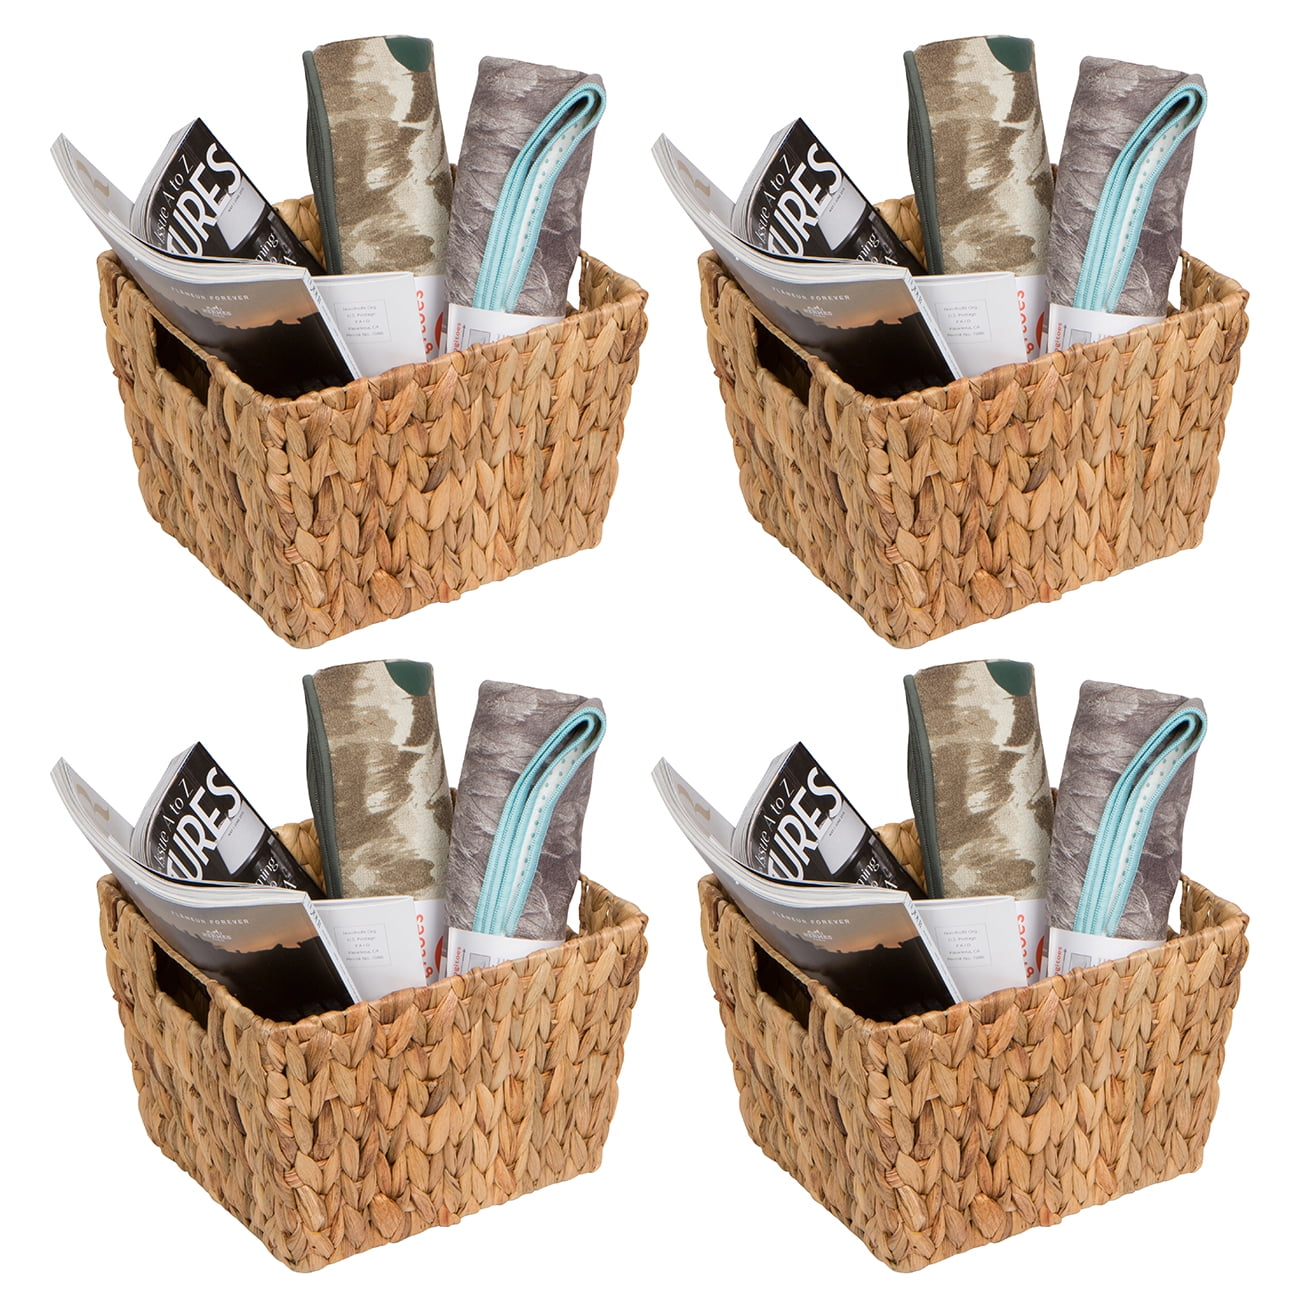 11.5 Hyacinth Storage Basket with Handles by Trademark Innovations Rectangular